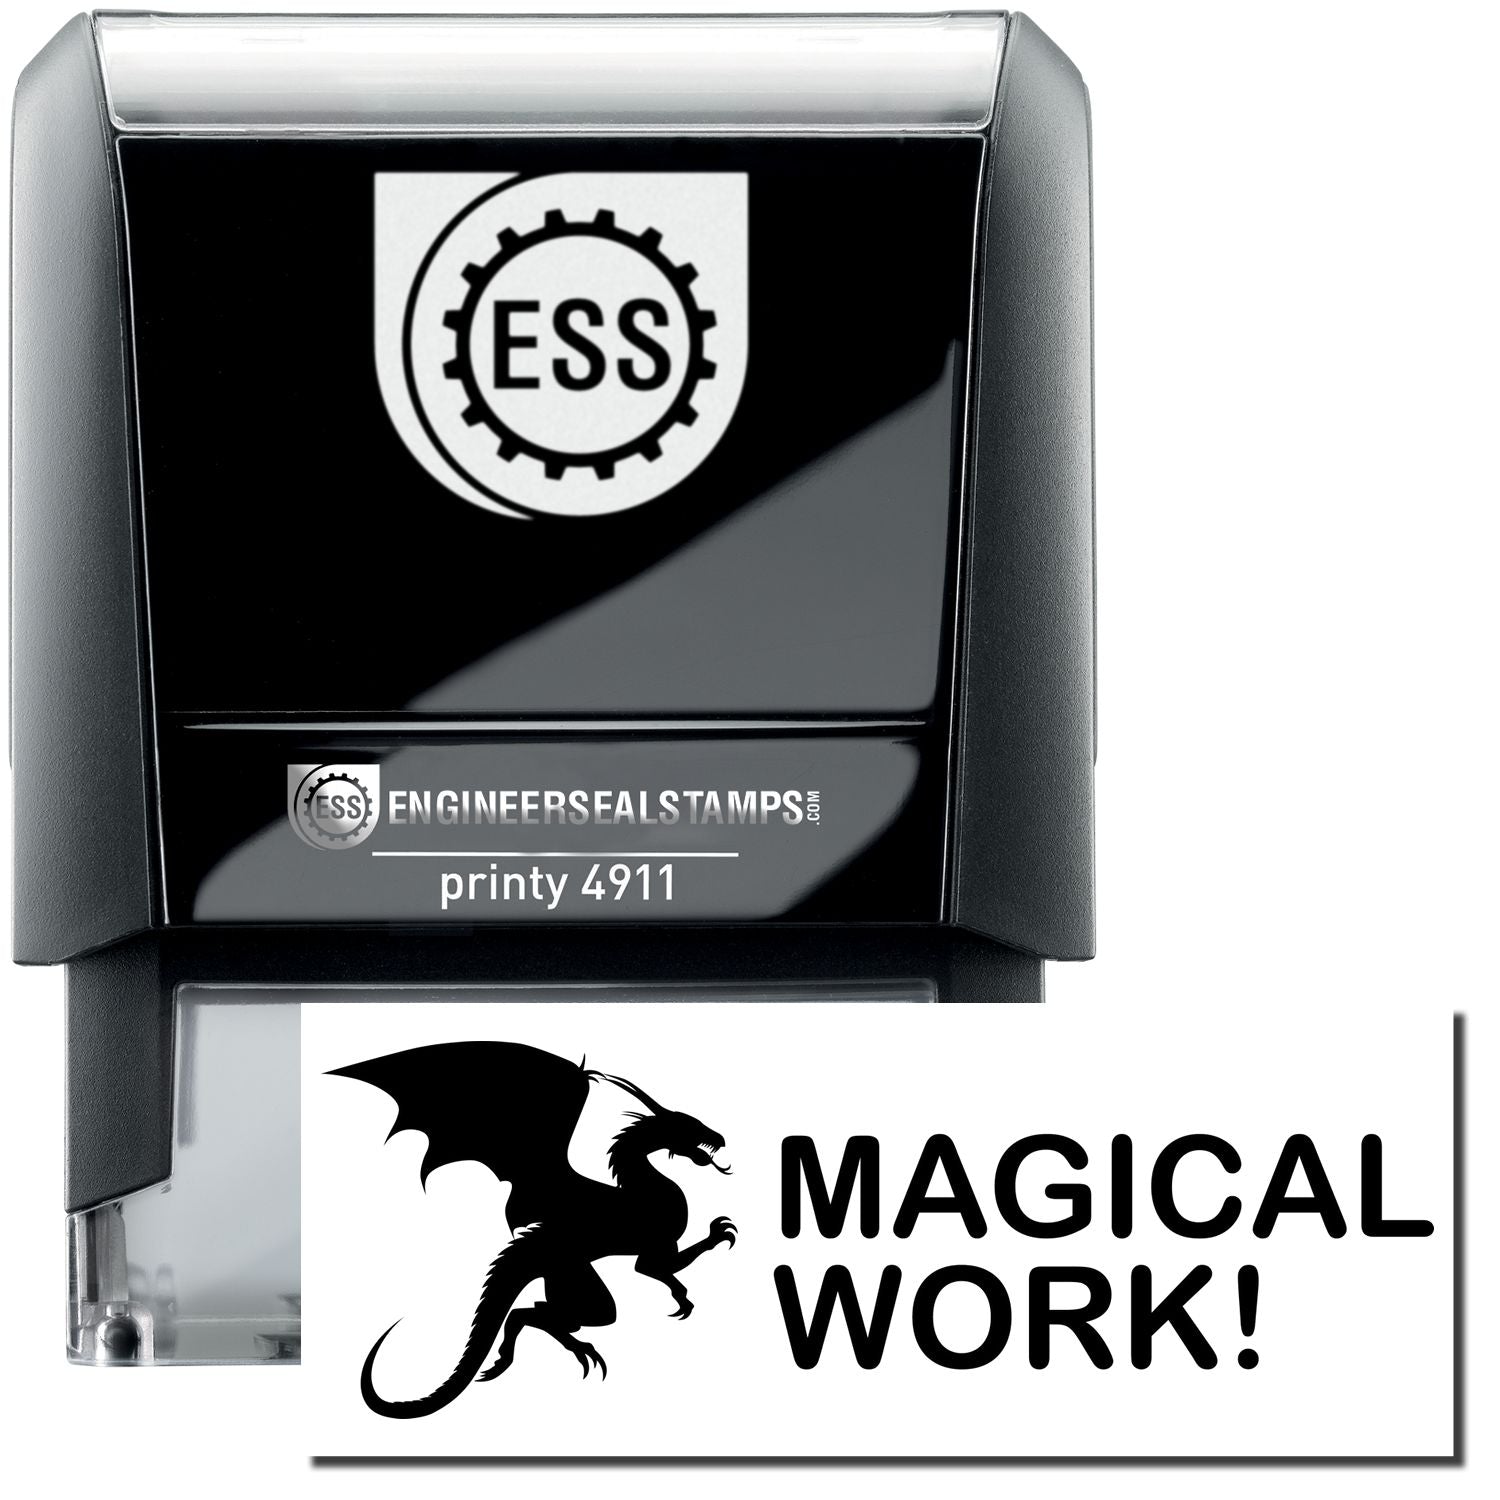 A self-inking stamp with a stamped image showing how the text "MAGICAL WORK!" (in a large font with an icon of a dragon on the left) is displayed after stamping.